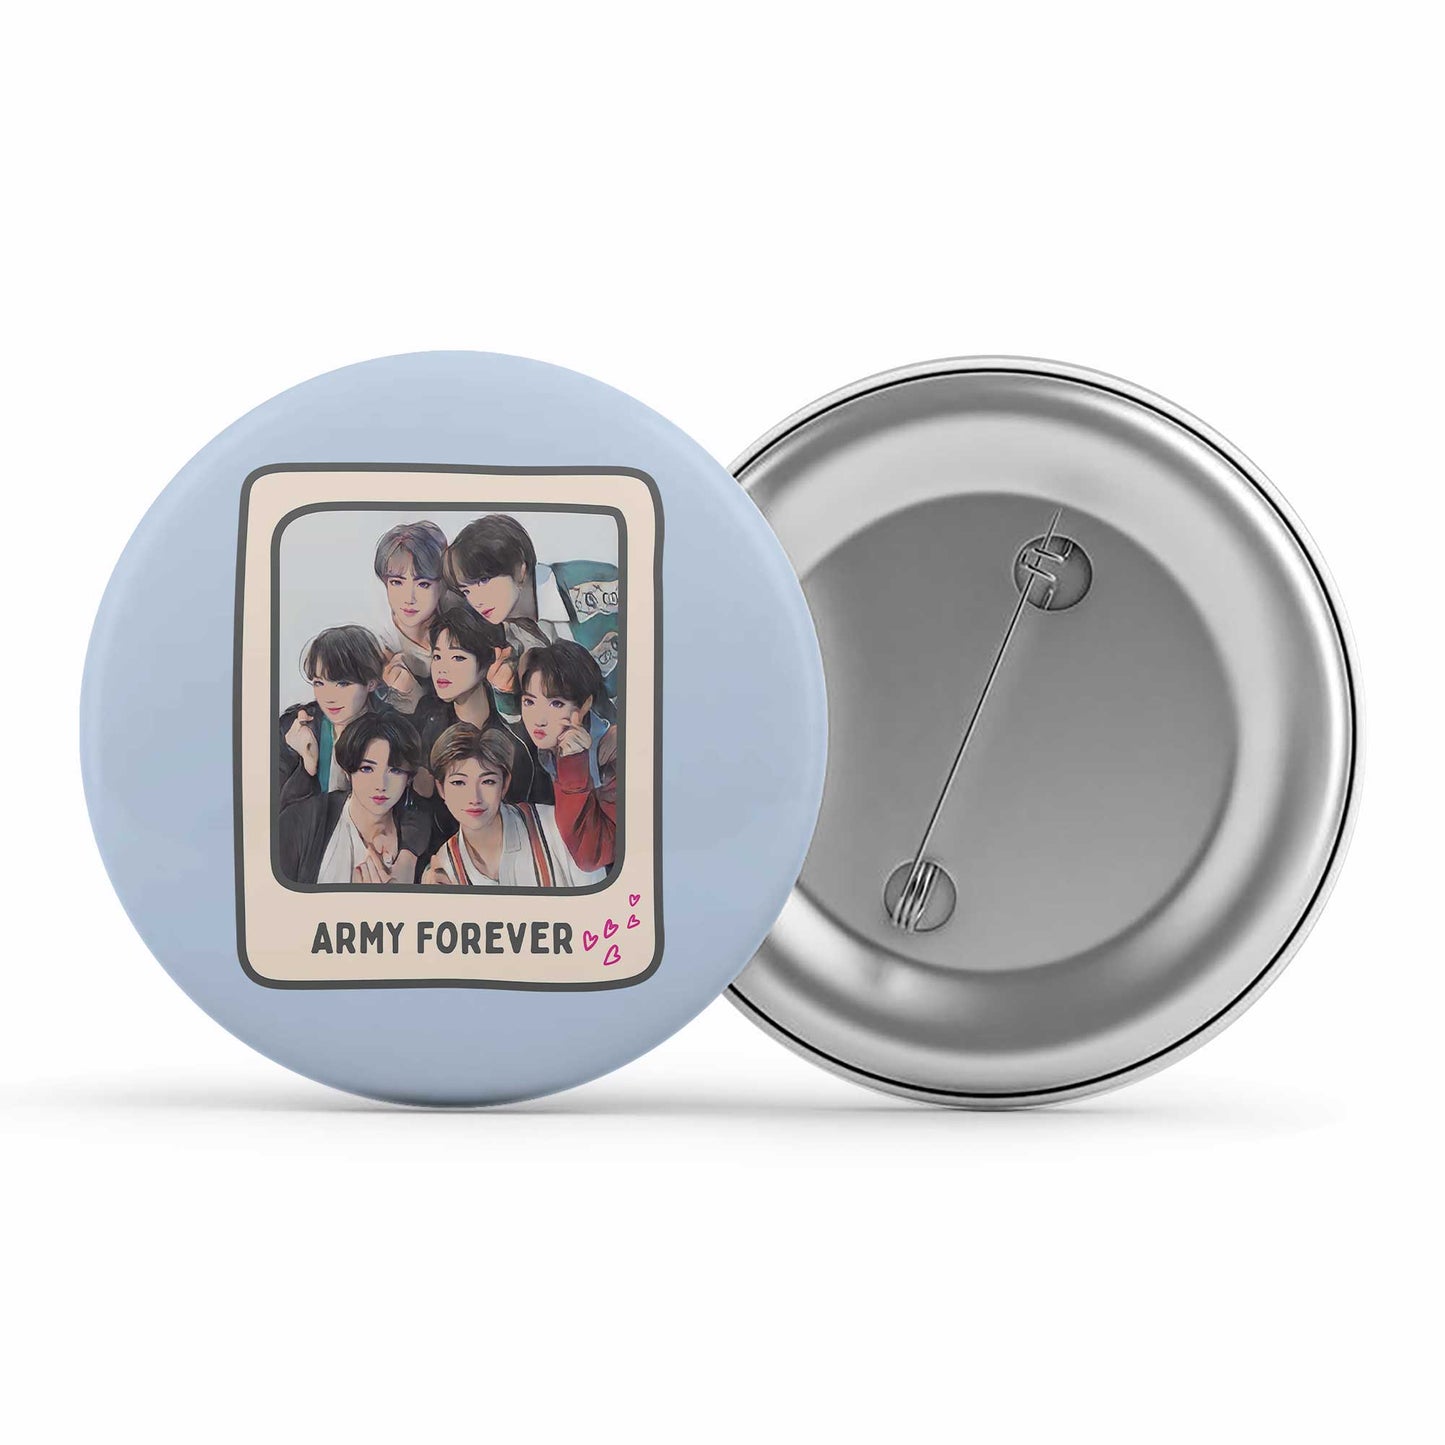 bts army forever badge pin button music band buy online united states of america usa the banyan tee tbt men women girls boys unisex  